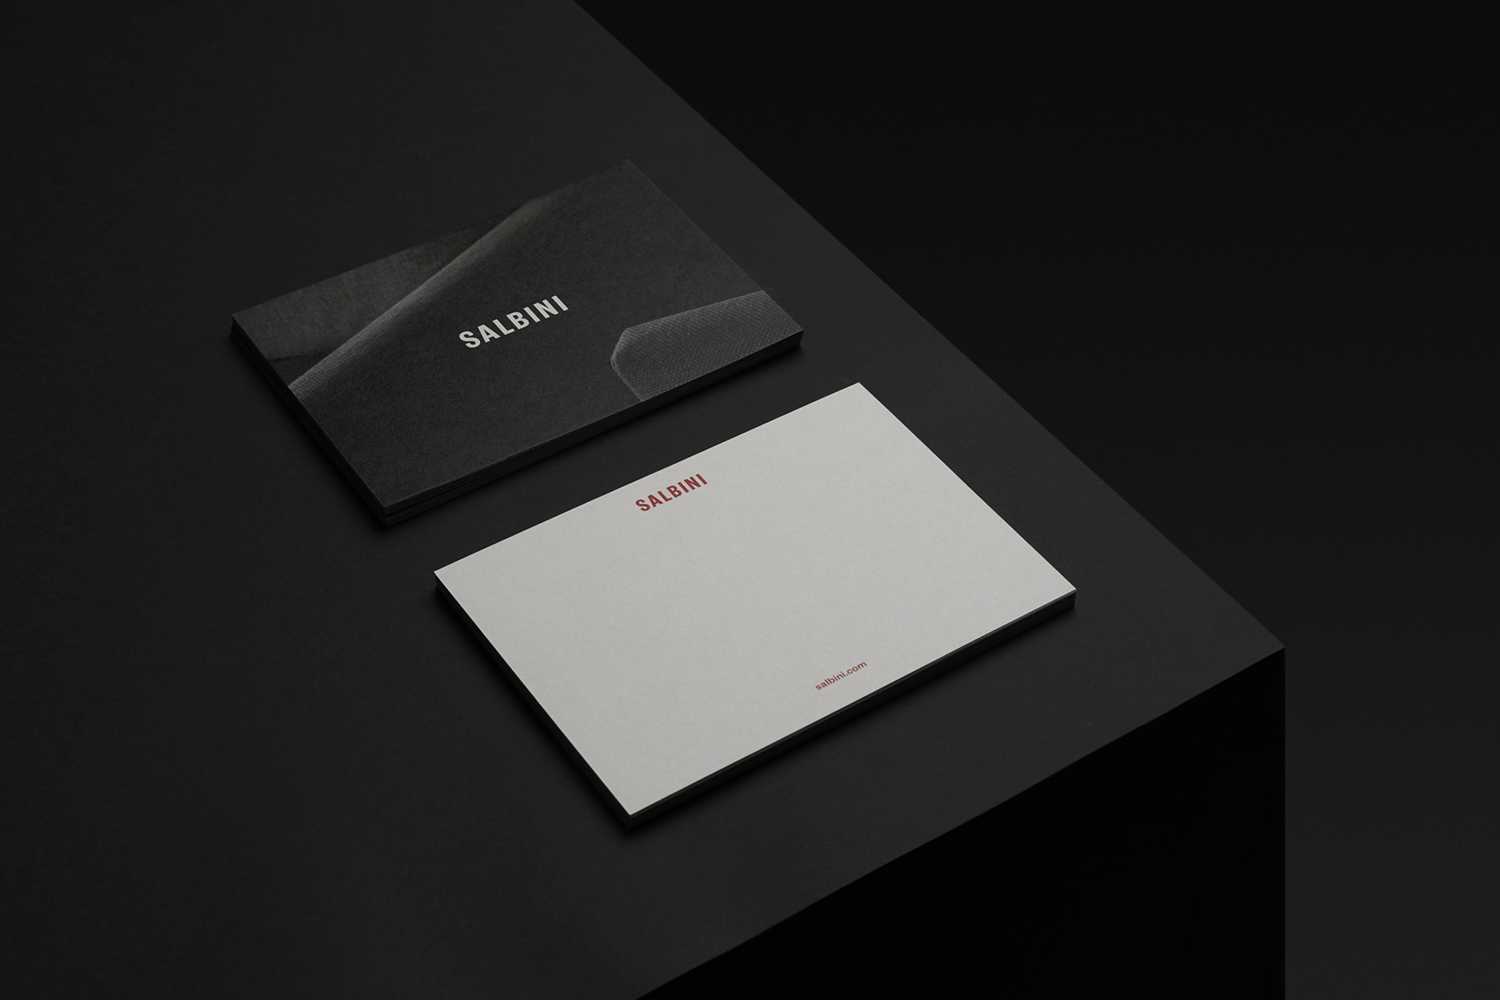 Visual identity and stationery design by Studio Brave for Italian online furniture retailer Salbini.